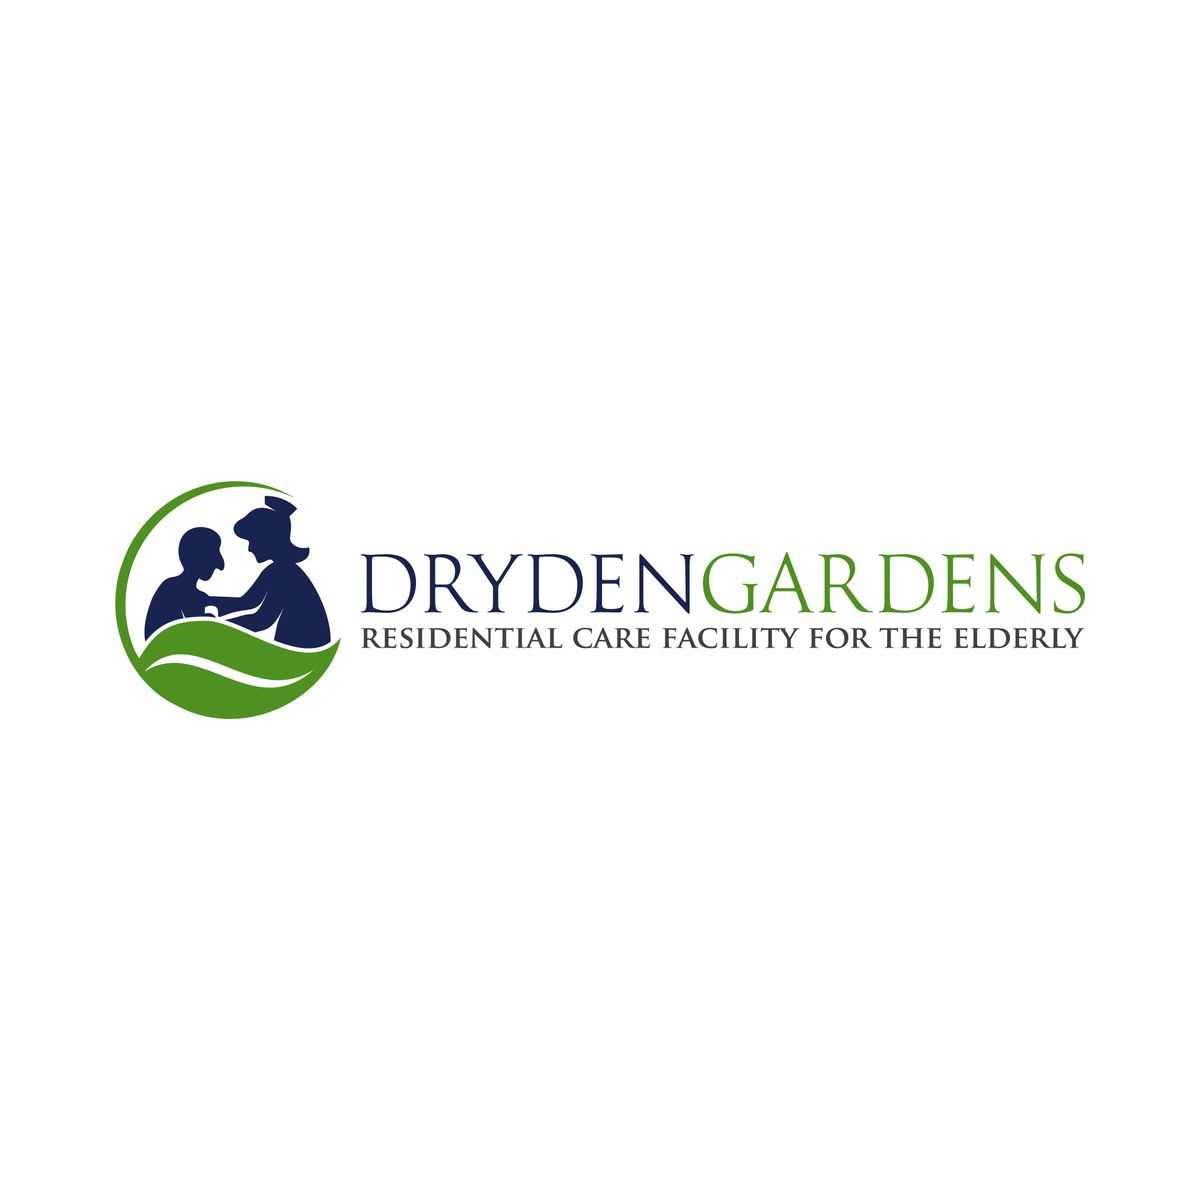 Logo of Dryden Gardens senior living community with a person's head in the design.